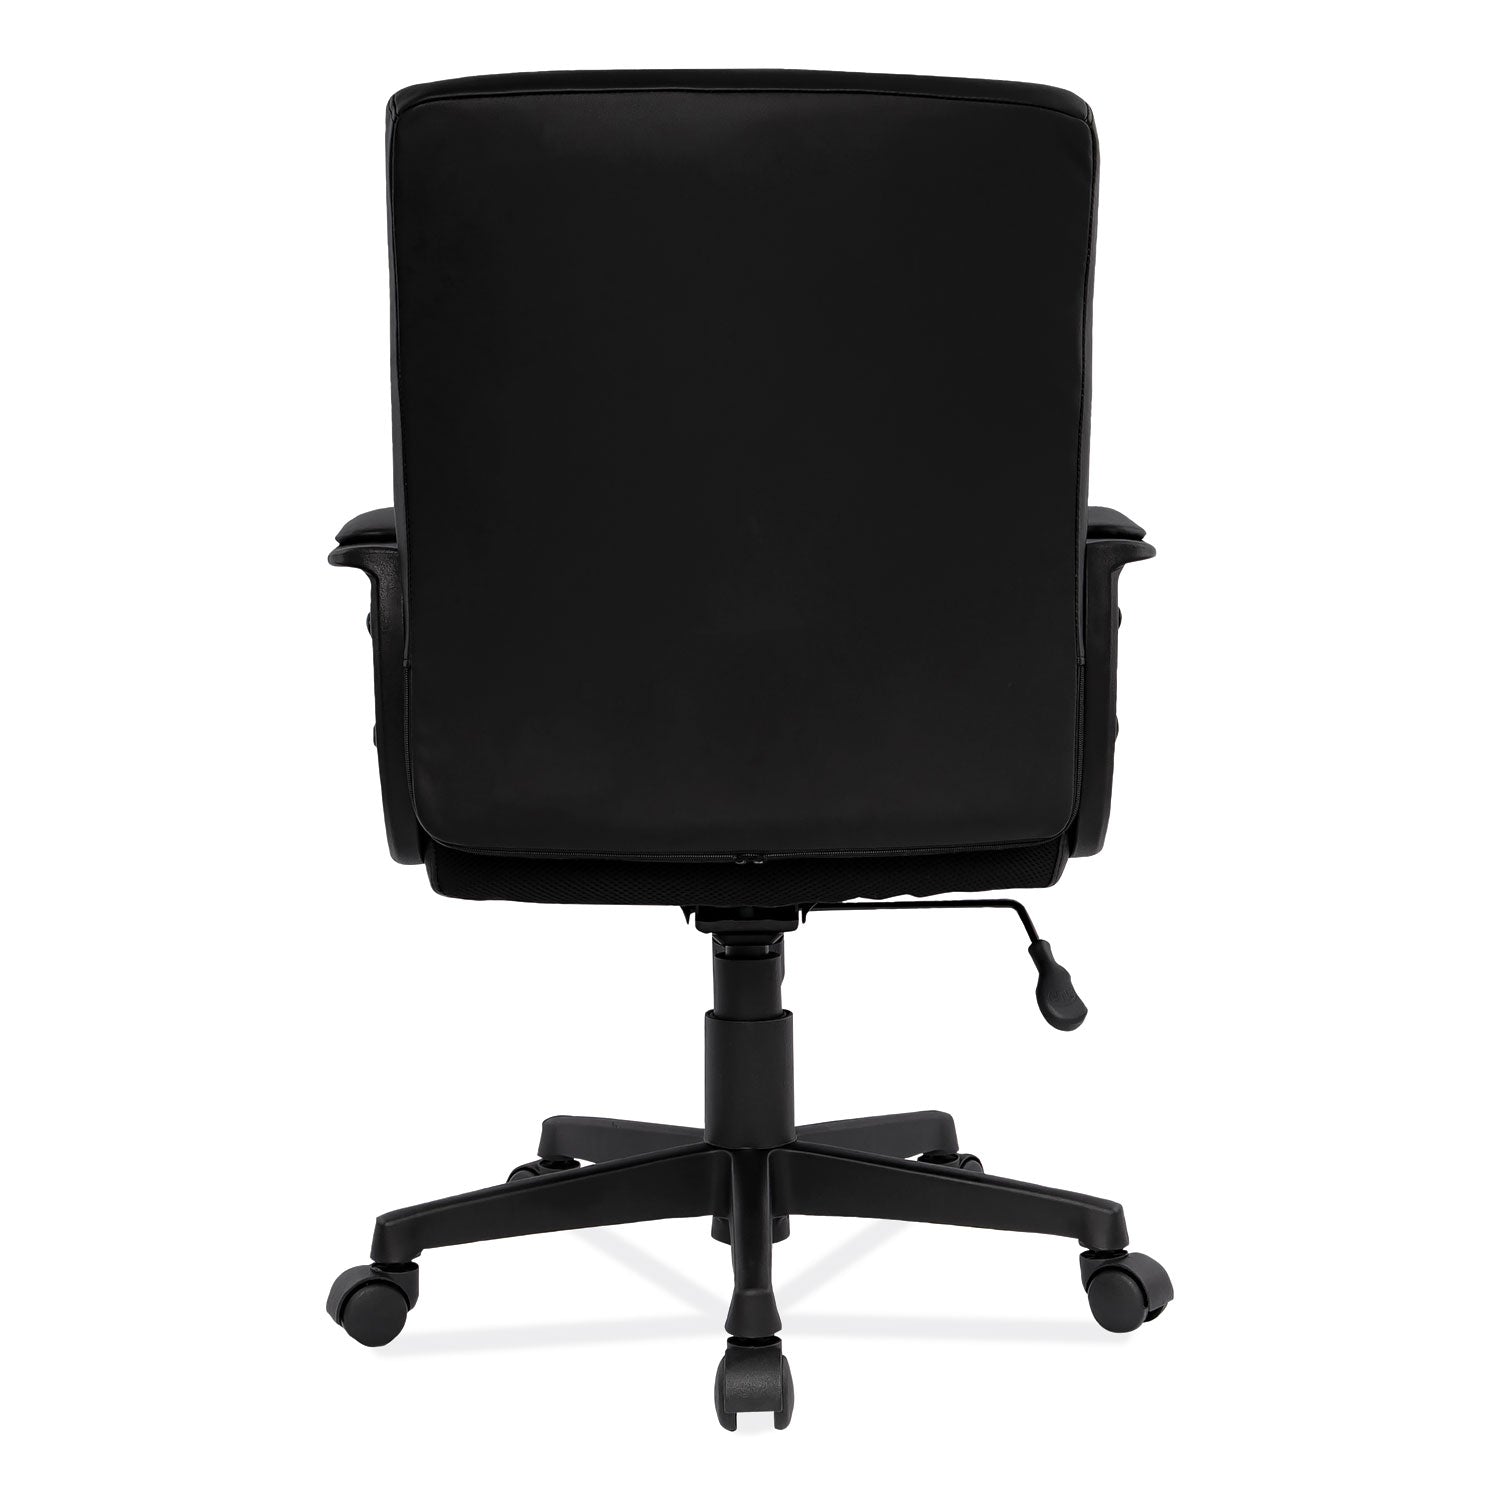 Alera Breich Series Manager Chair, Supports Up to 275 lbs, 16.73" to 20.39" Seat Height, Black Seat/Back, Black Base - 4